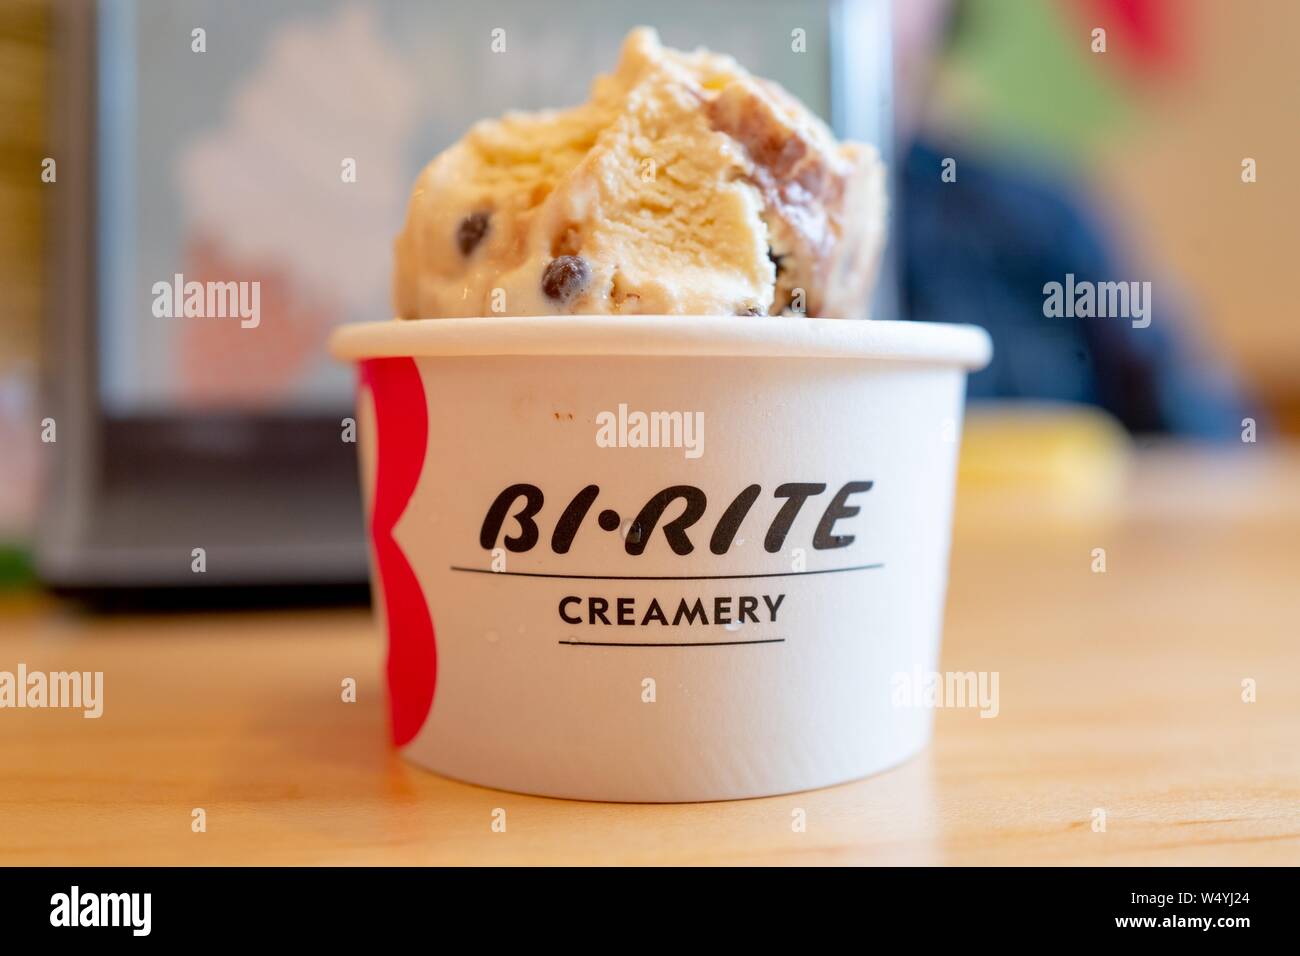 https://c8.alamy.com/comp/W4YJ24/close-up-of-ice-cream-with-logo-for-bi-rite-creamery-an-iconic-ice-cream-store-in-the-mission-district-neighborhood-of-san-francisco-california-july-18-2019-W4YJ24.jpg